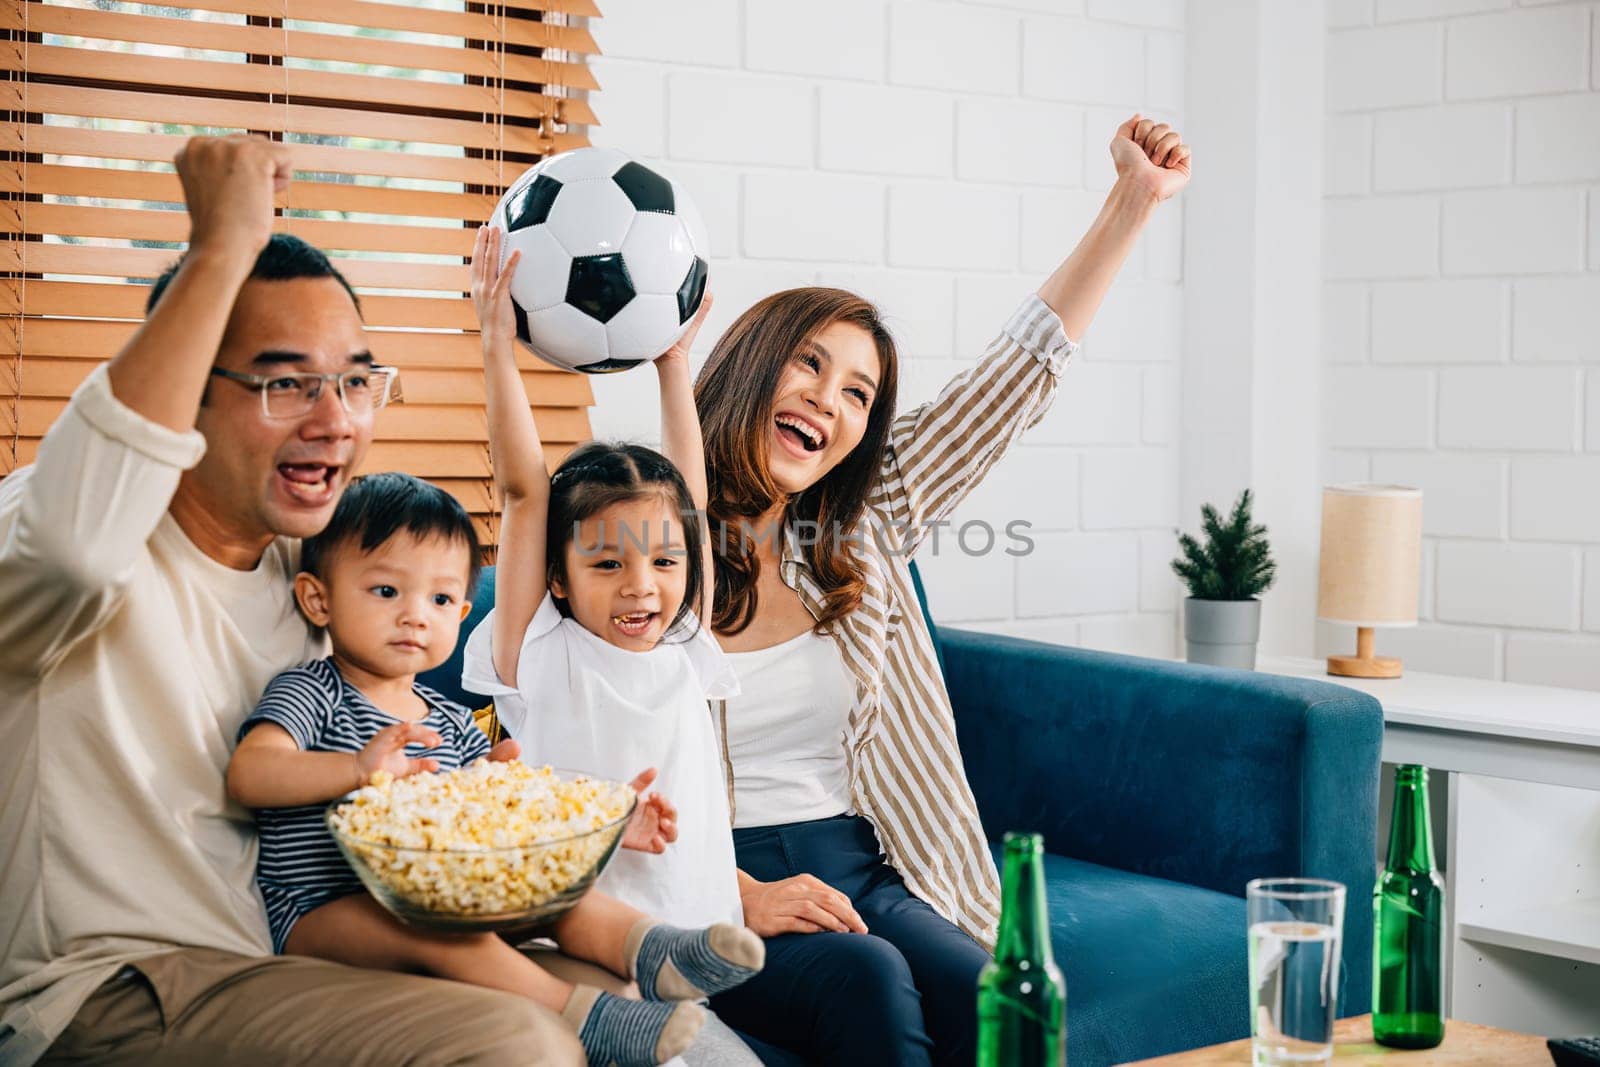 Delighted parents and children enjoy a football match at home, celebrating a goal with popcorn and a ball. Their excitement and togetherness capture the joy of winning and family fun.